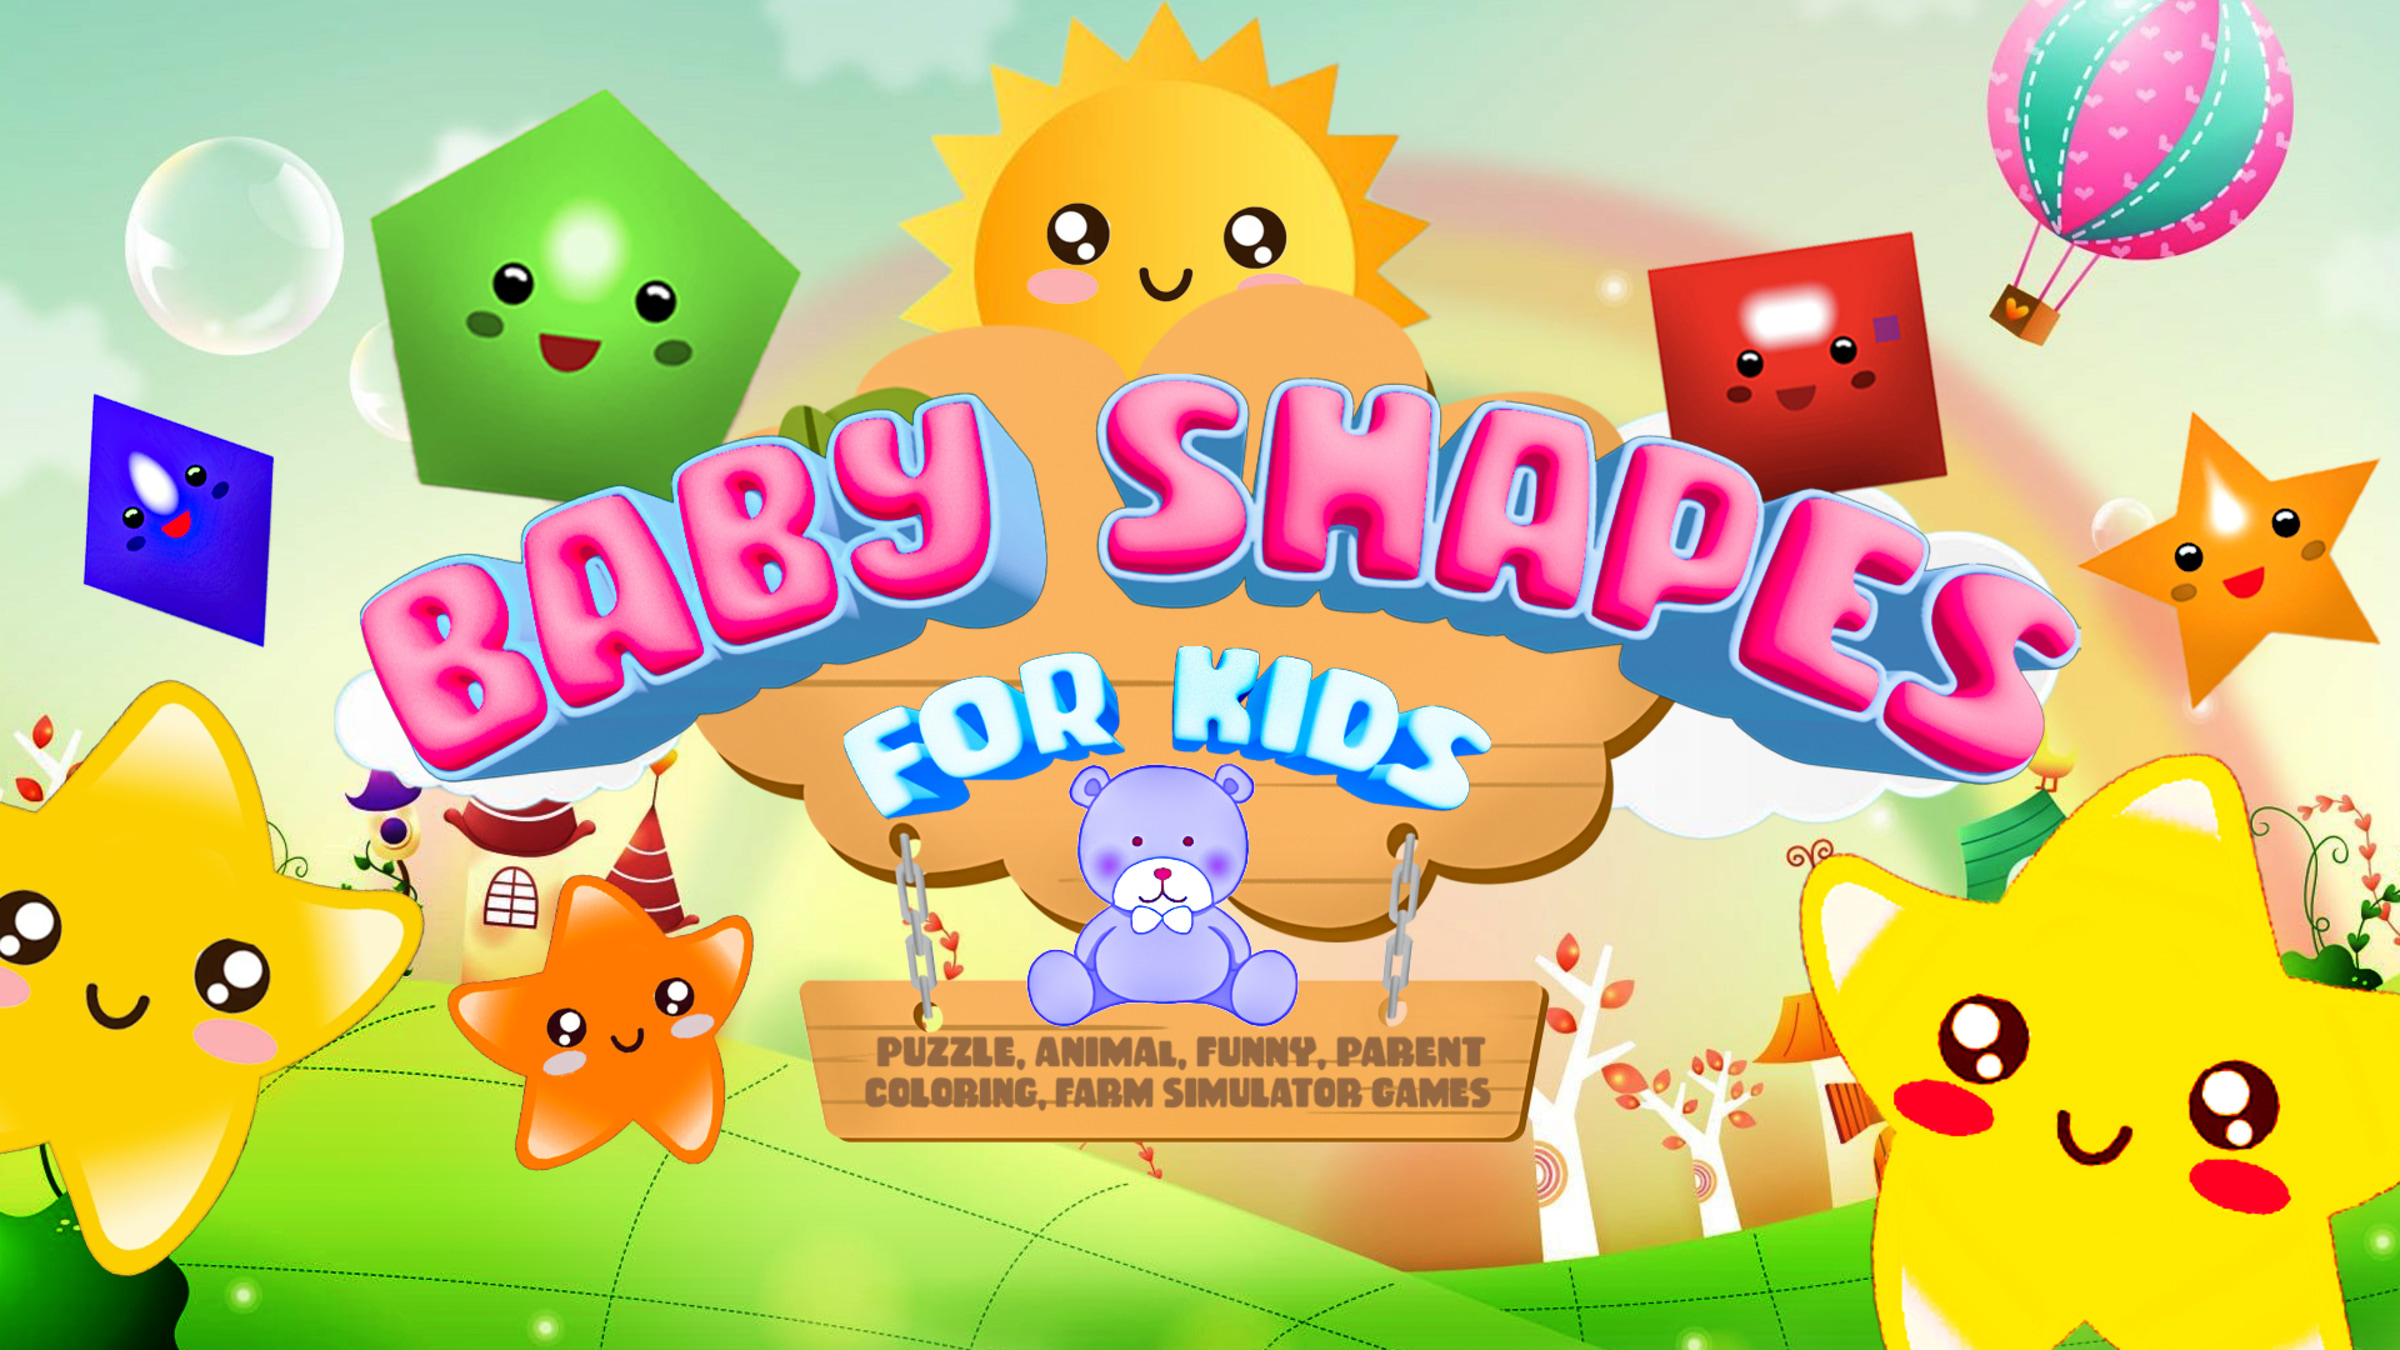 https://assets.nintendo.com/image/upload/c_fill,w_1200/q_auto:best/f_auto/dpr_2.0/ncom/en_US/games/switch/b/baby-shapes-for-kids-puzzle-animal-funny-parent-coloring-farm-simulator-games-switch/